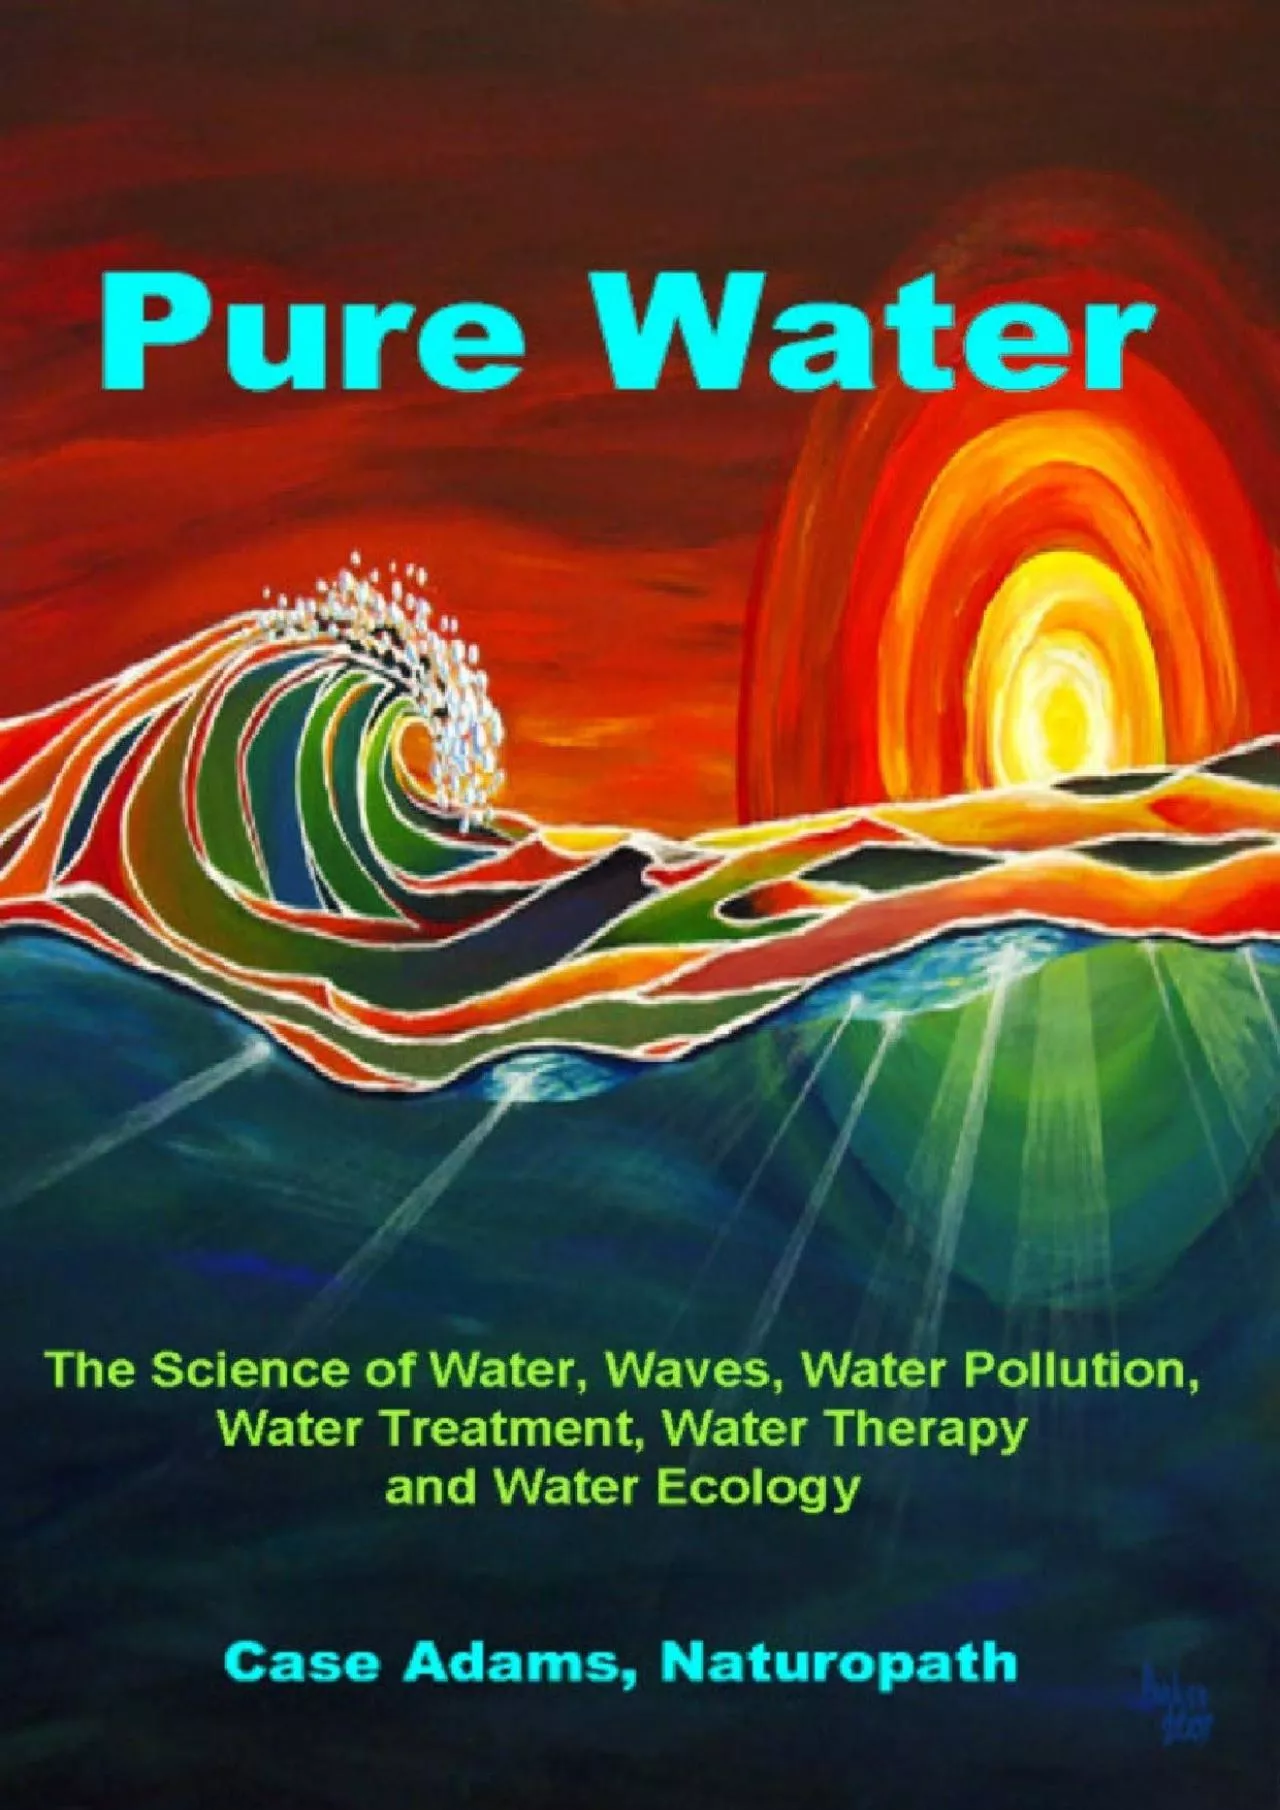 (EBOOK)-Pure Water: The Science of Water, Waves, Water Pollution, Water Treatment, Water